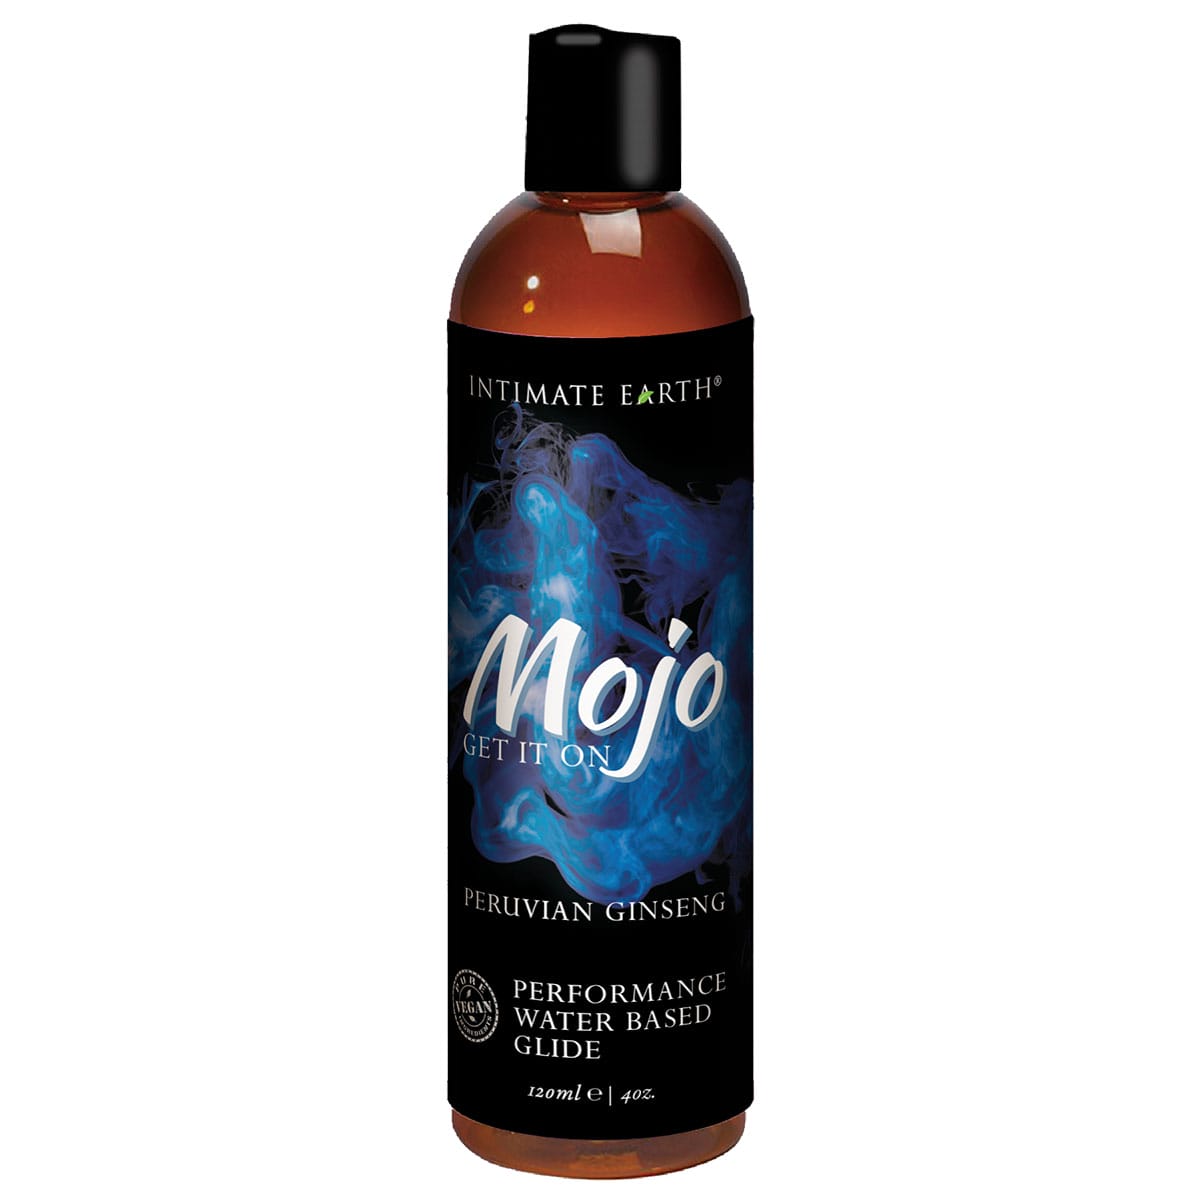 Buy MOJO Peruvian Ginseng   Performance Glide        silicone based lubricants for her.